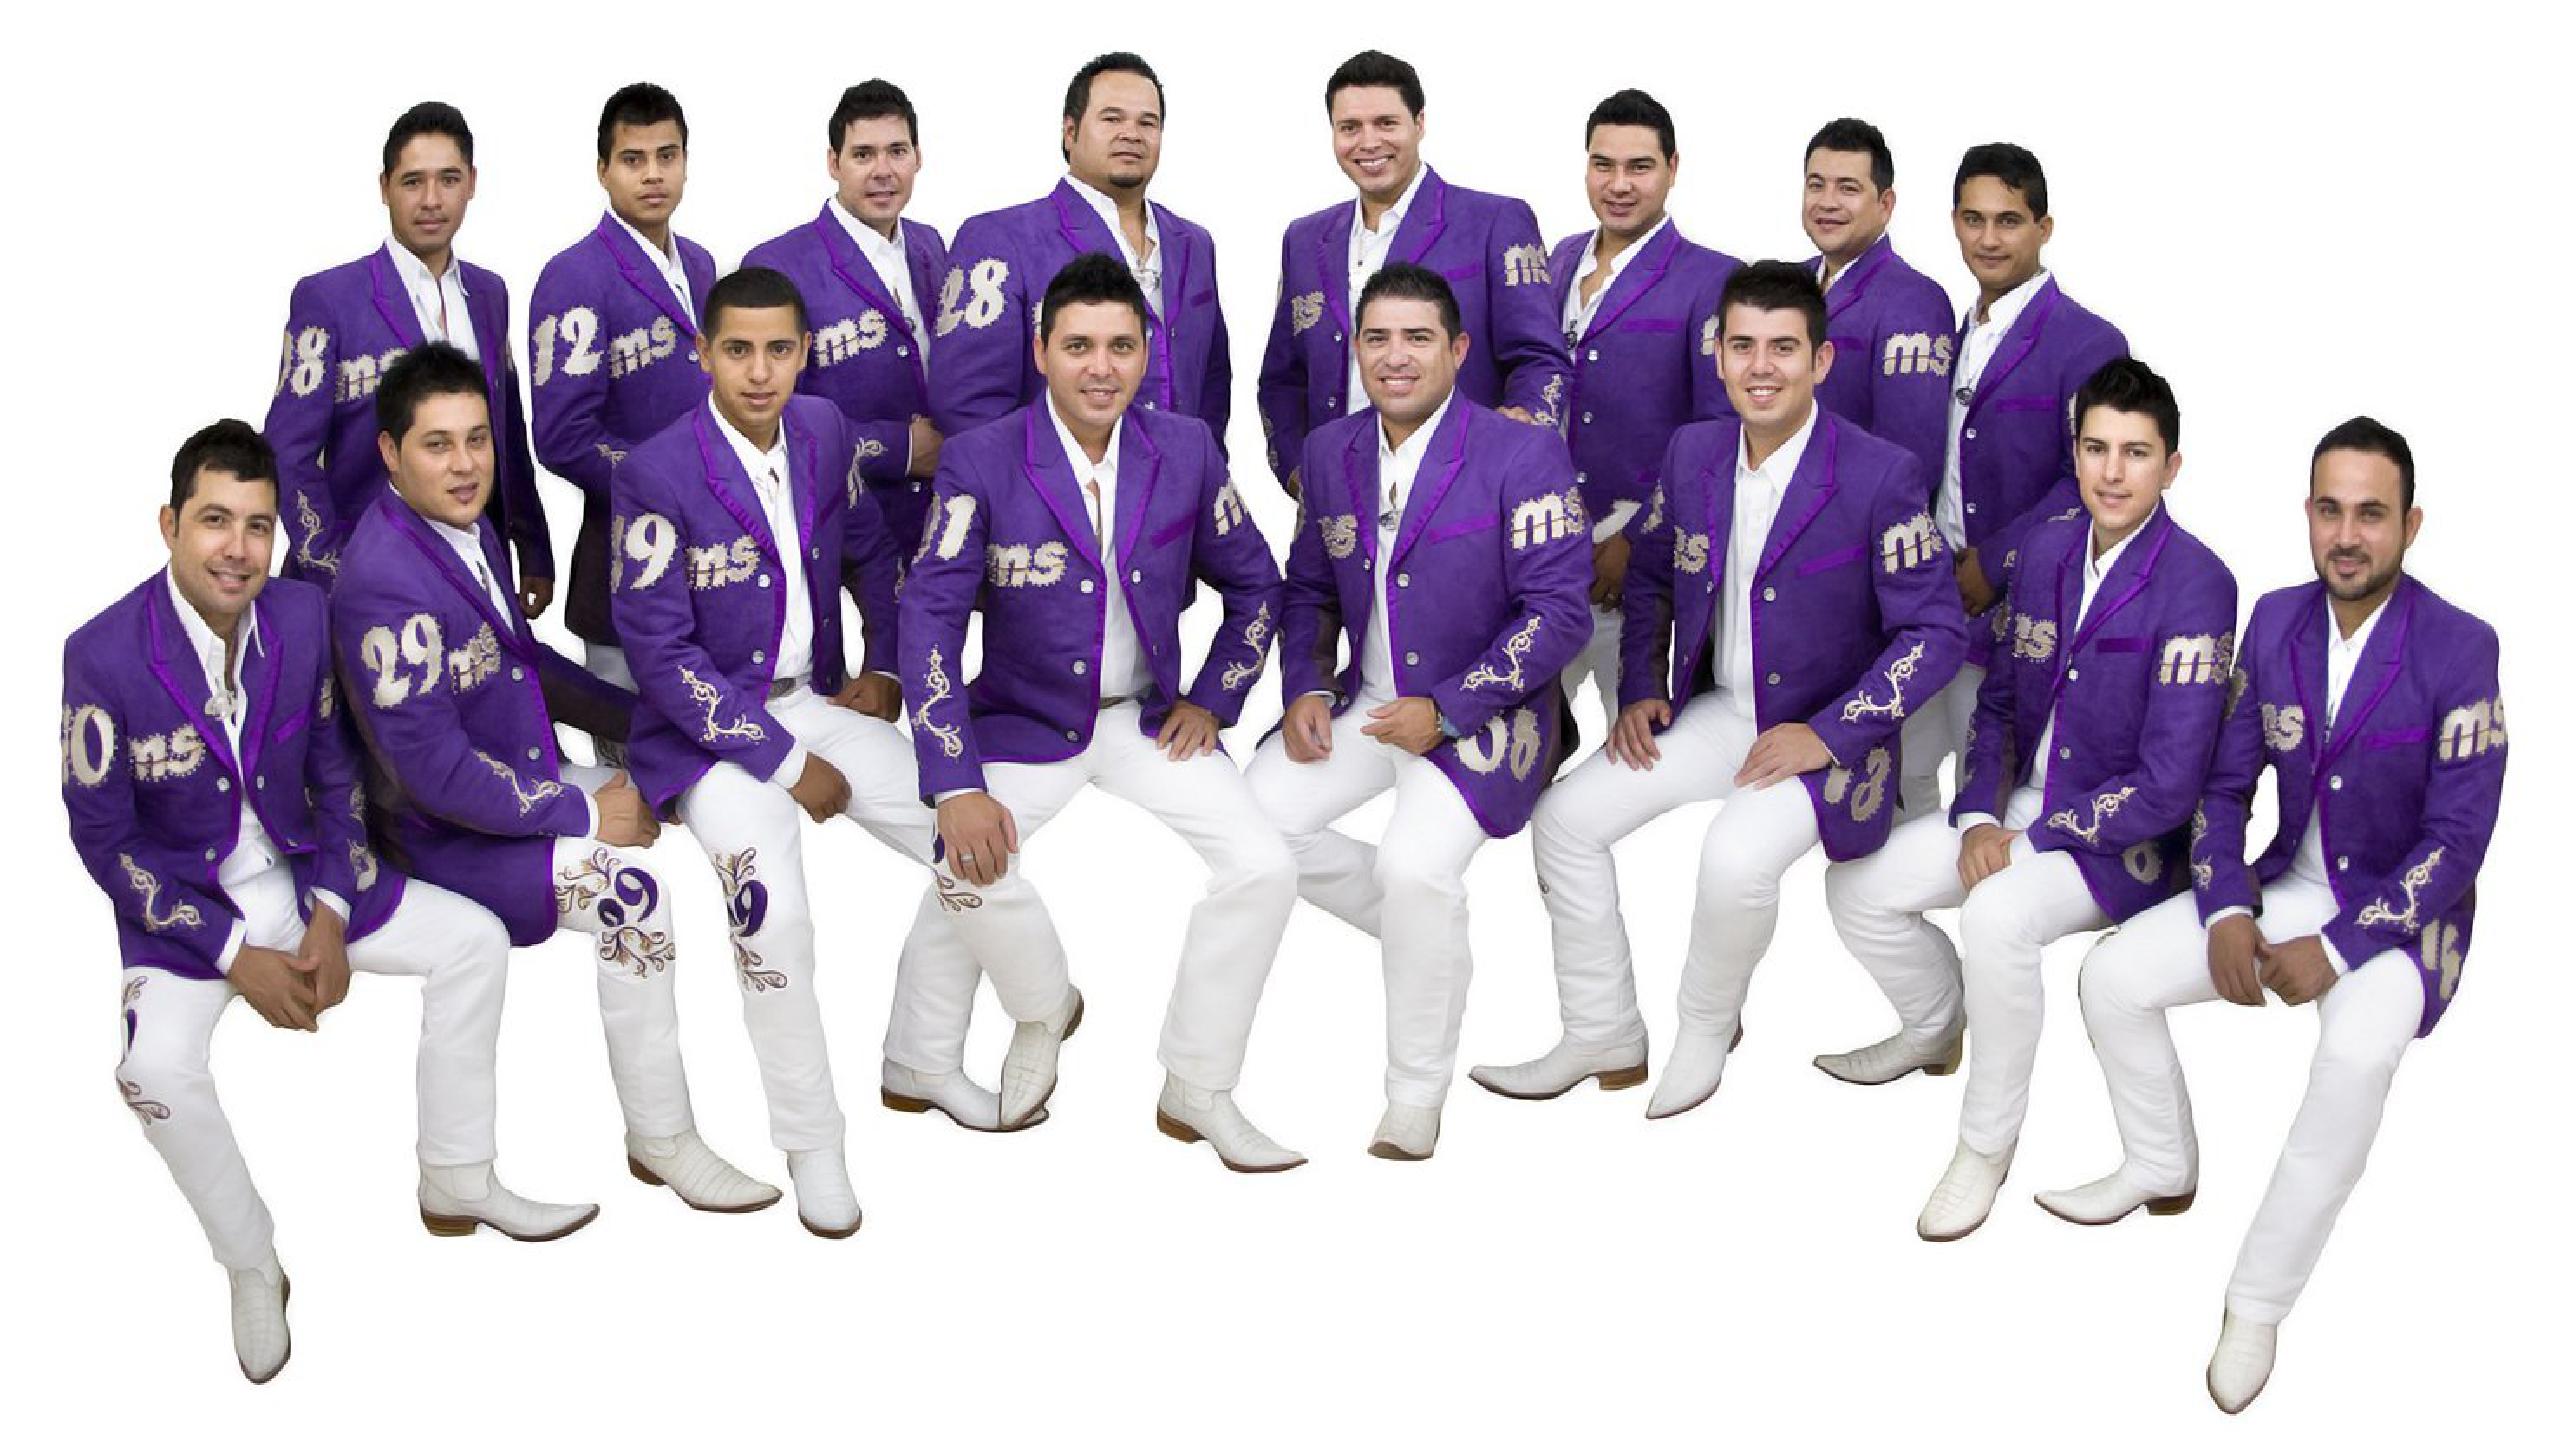 Banda MS tour dates 2022 2023. Banda MS tickets and concerts. Wegow Great Britain